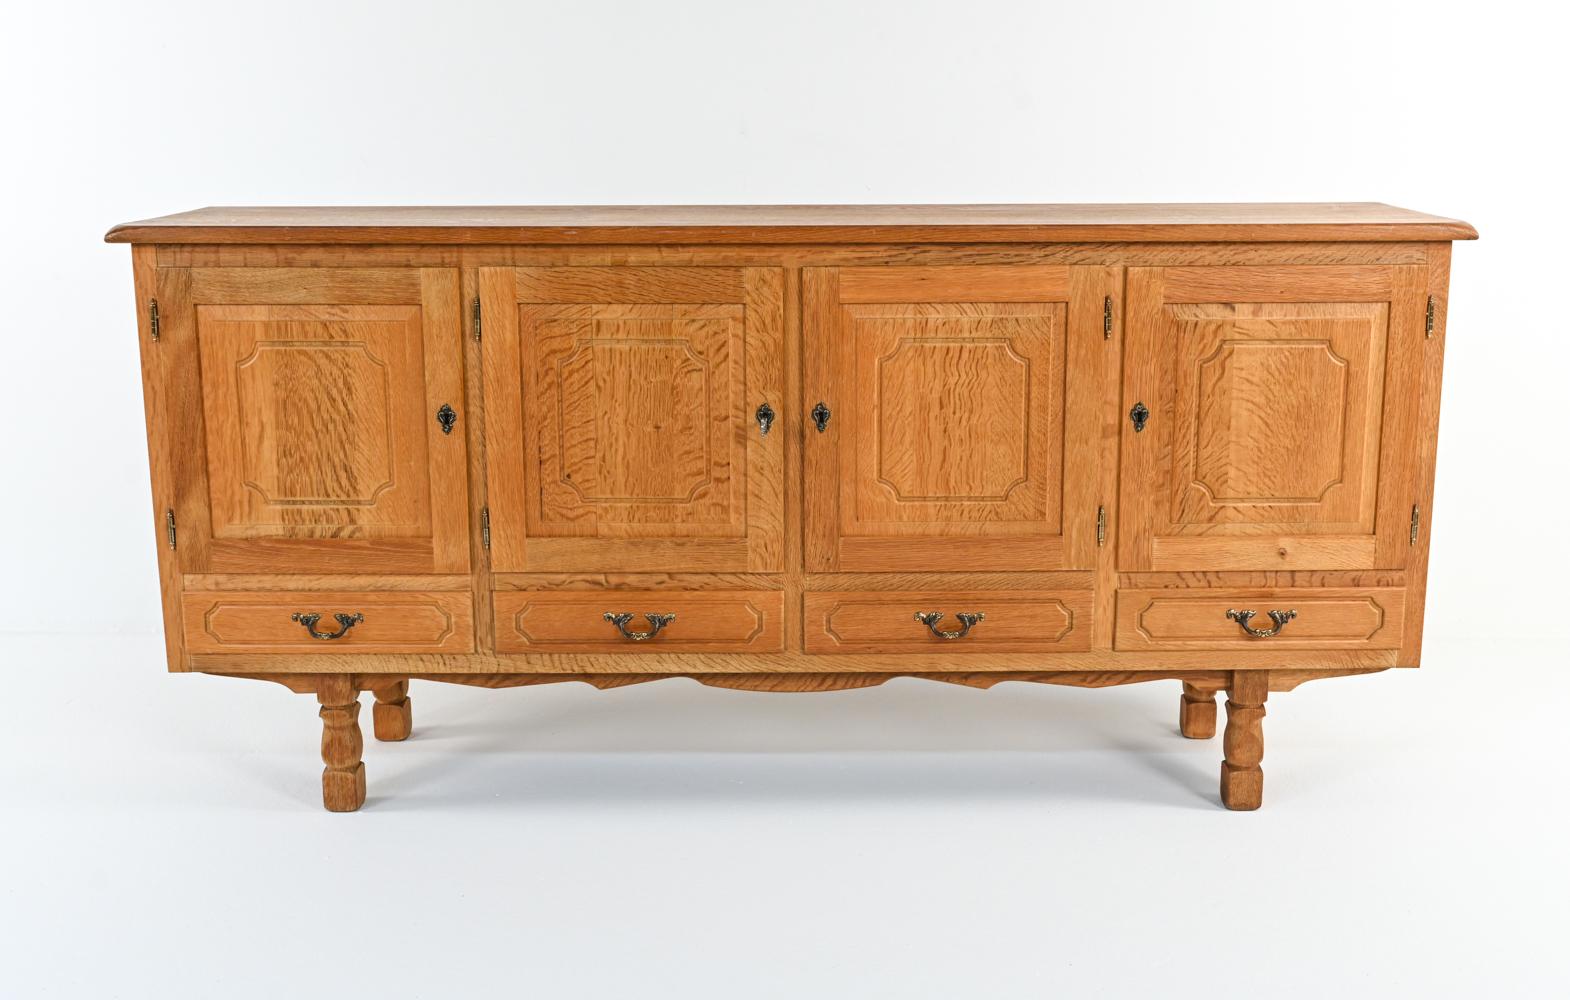 Quarter-sawn tiger oak takes center stage in this fabulous sideboard cabinet, which features raised-panel millwork doors, sculpted legs and an unusual notched apron. Four felt-lined drawers and four large cabinets with adjustable shelves provide